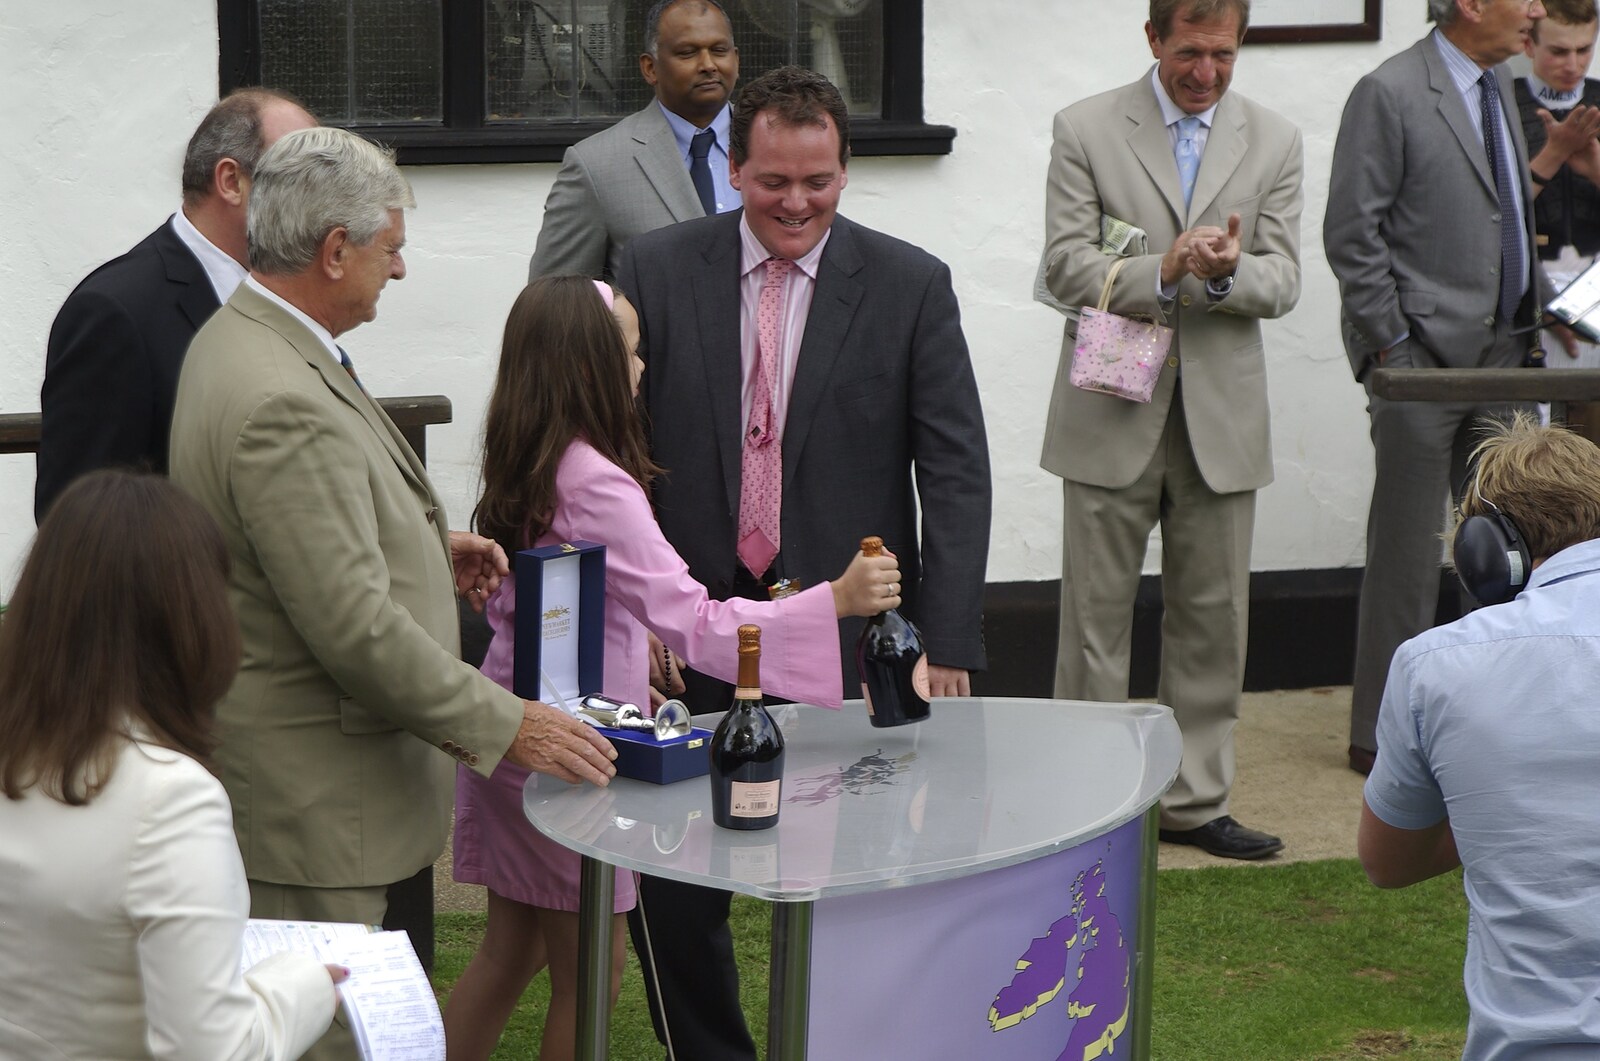 Champagne and prizes are handed out from A Day At The Races, Newmarket, Suffolk - 23rd August 2008